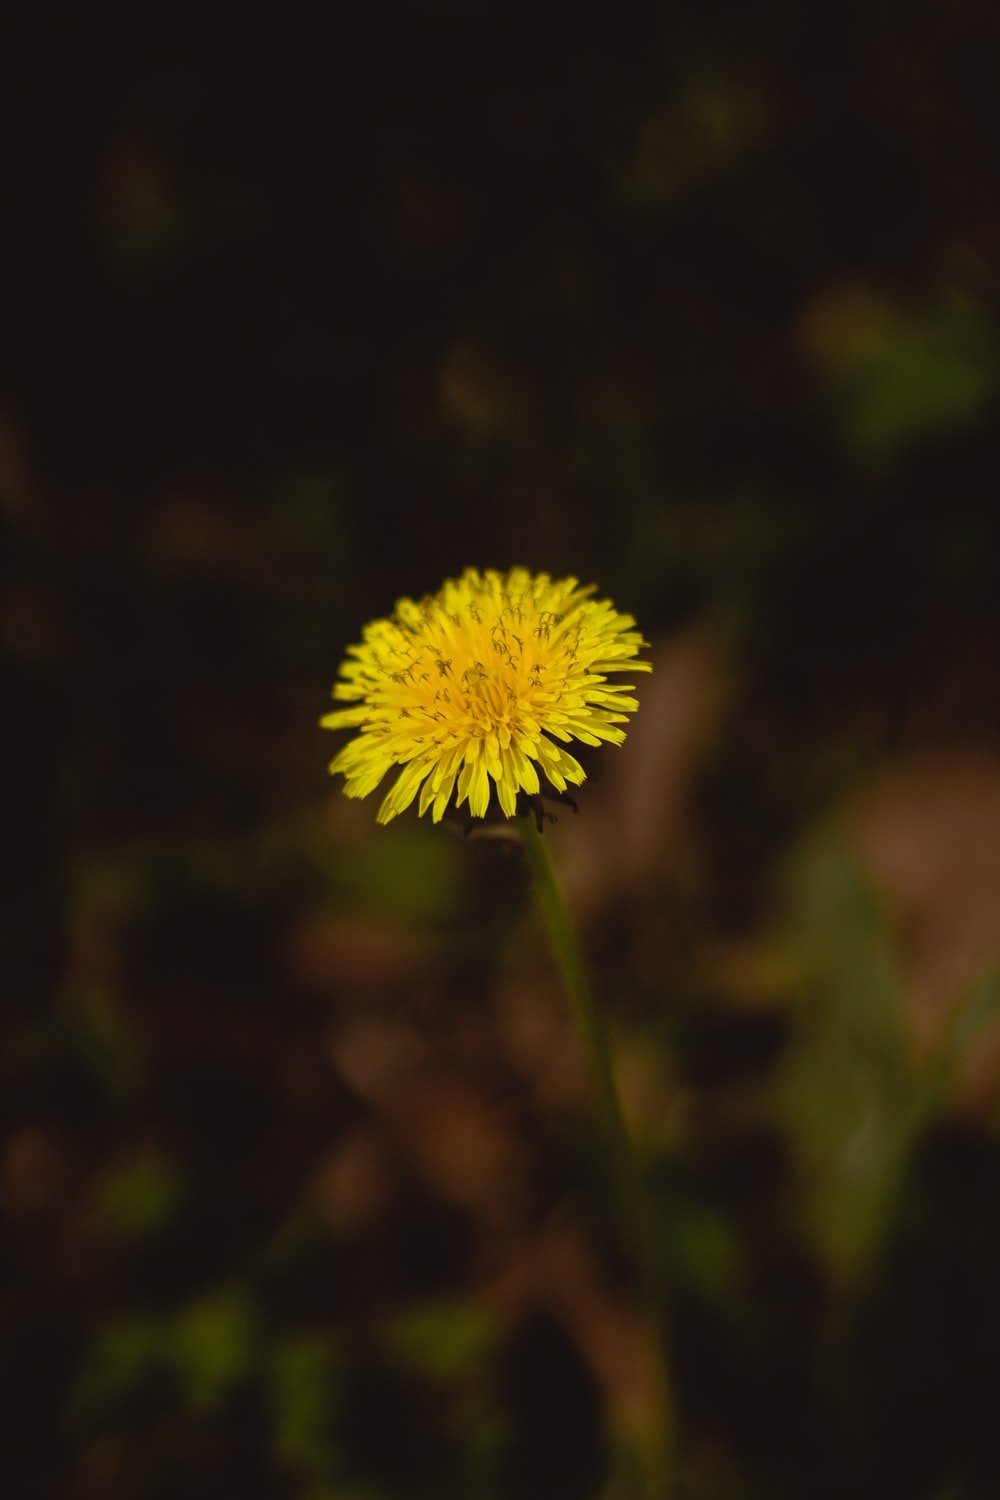 yellow dandelion in close up photography photo